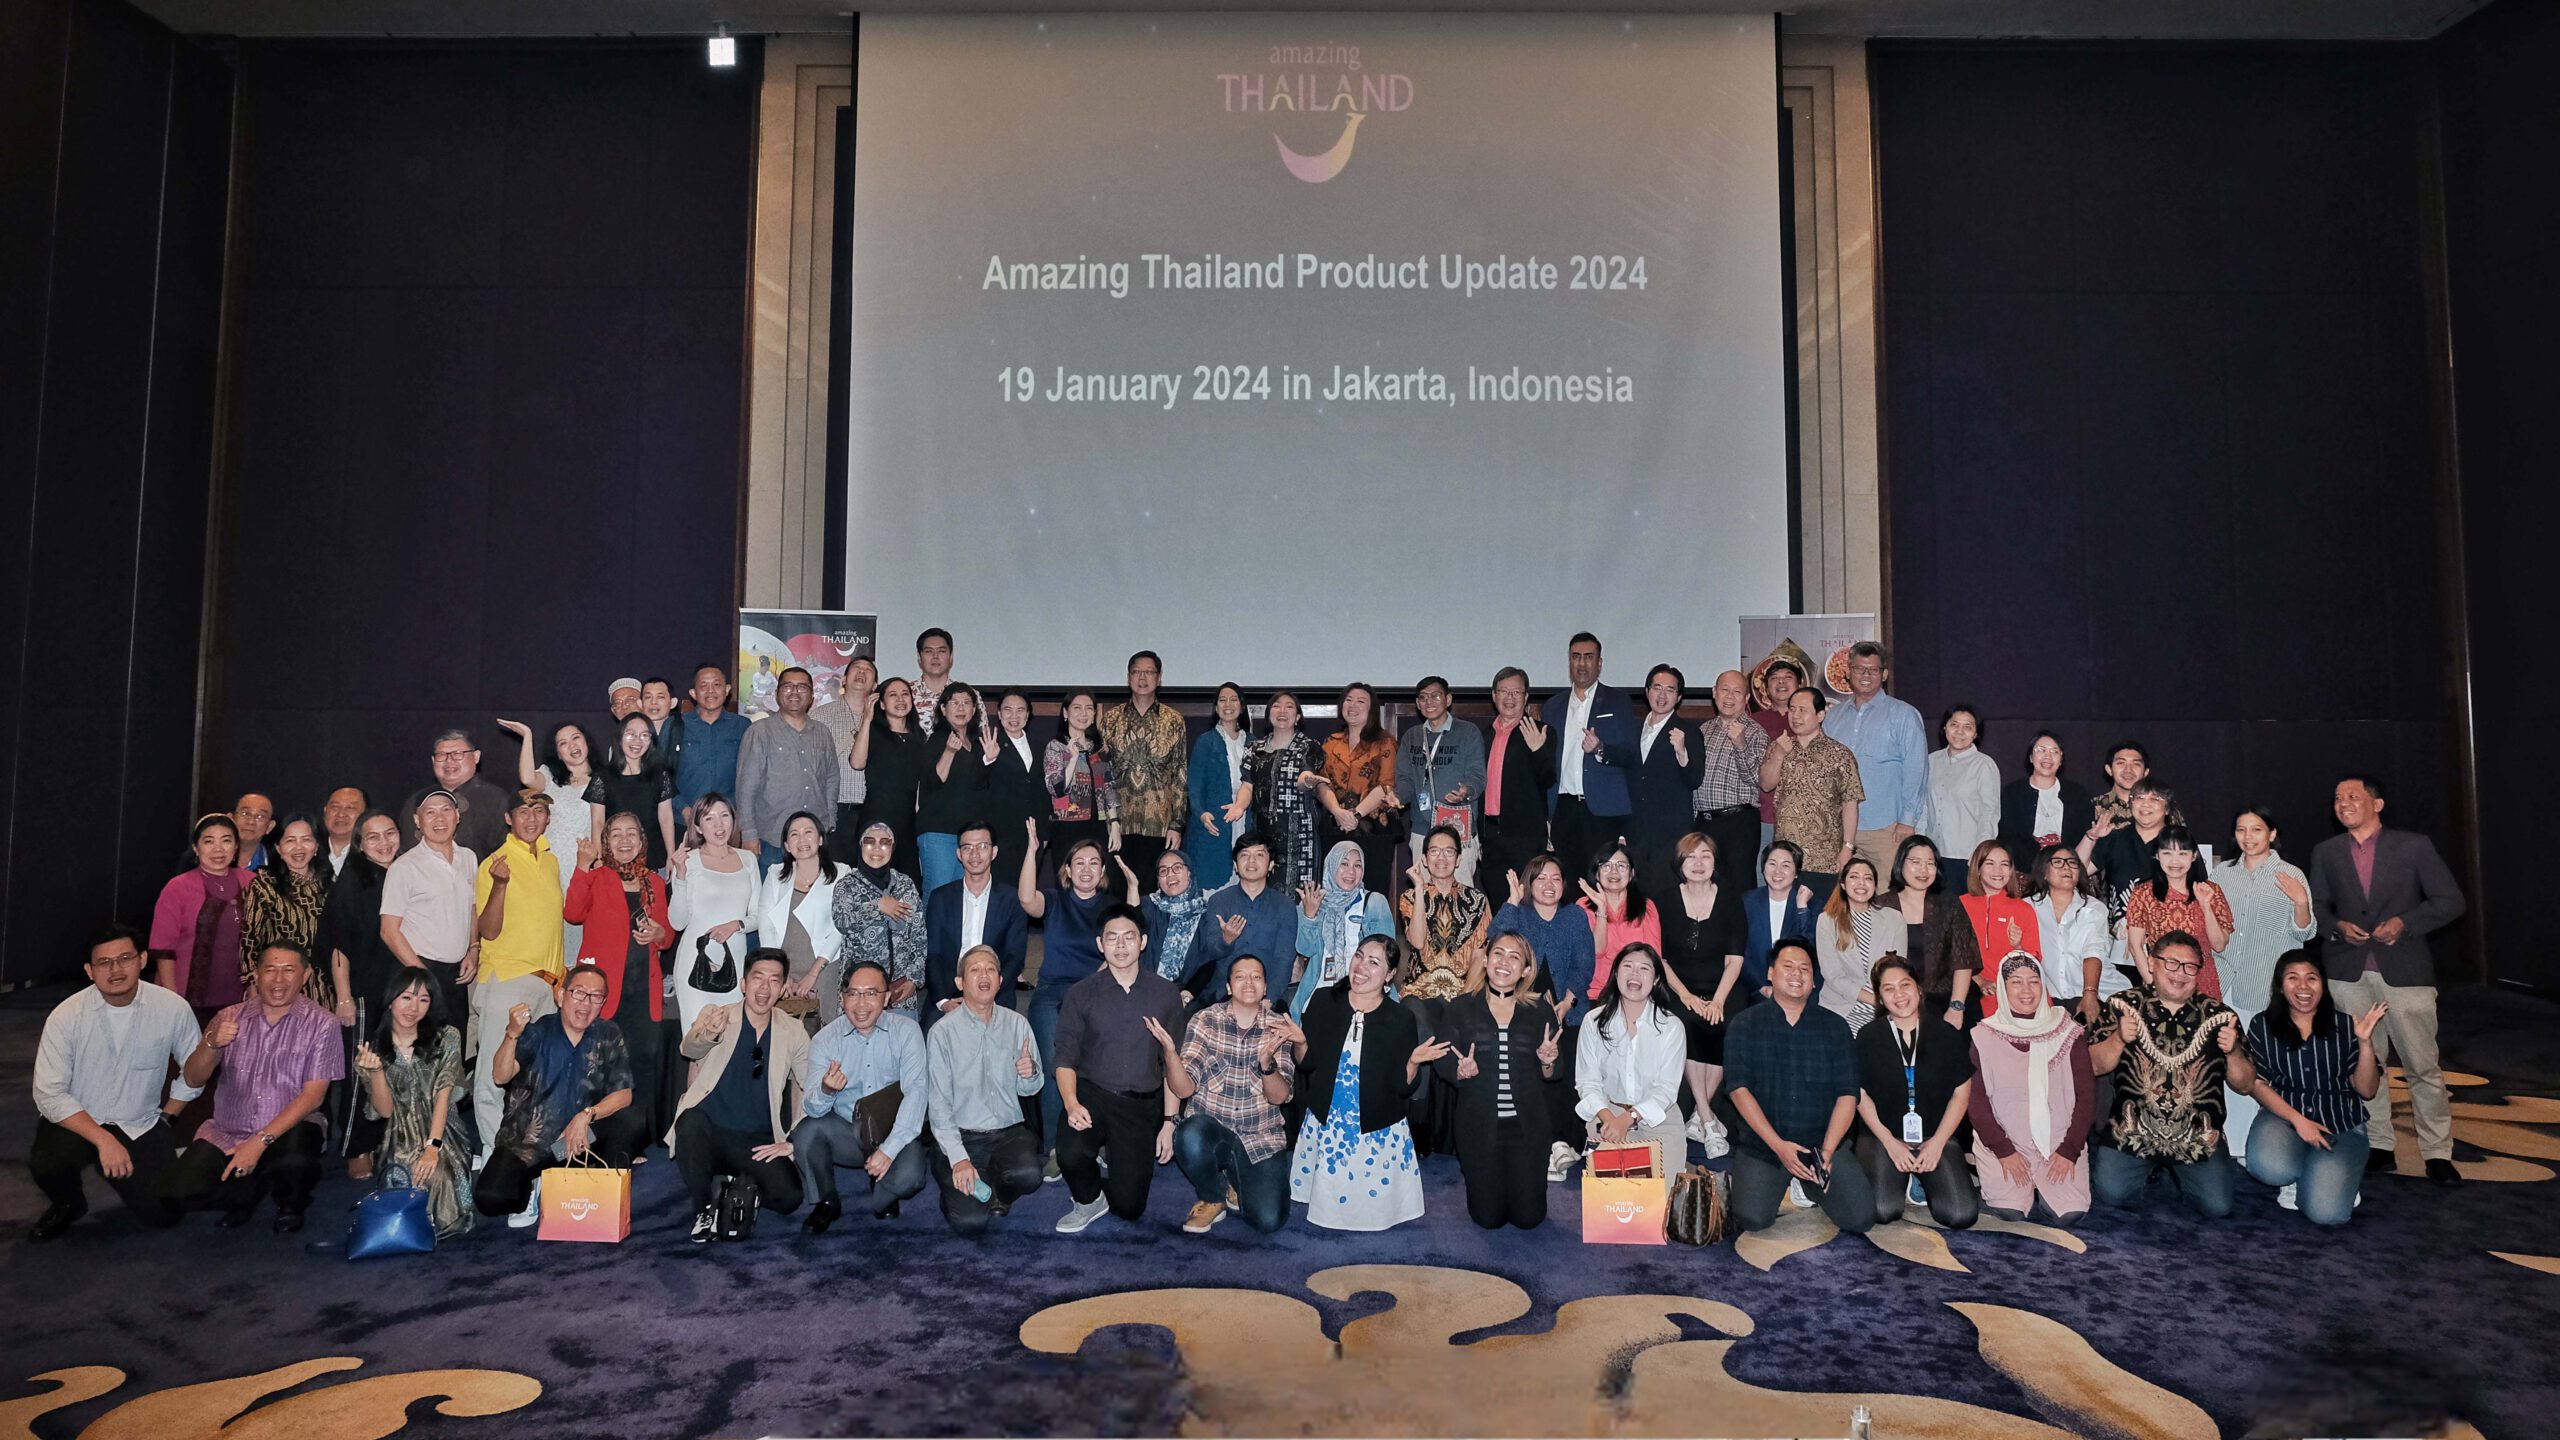 TAT staged Amazing Thailand Product Update 2024 in Indonesia